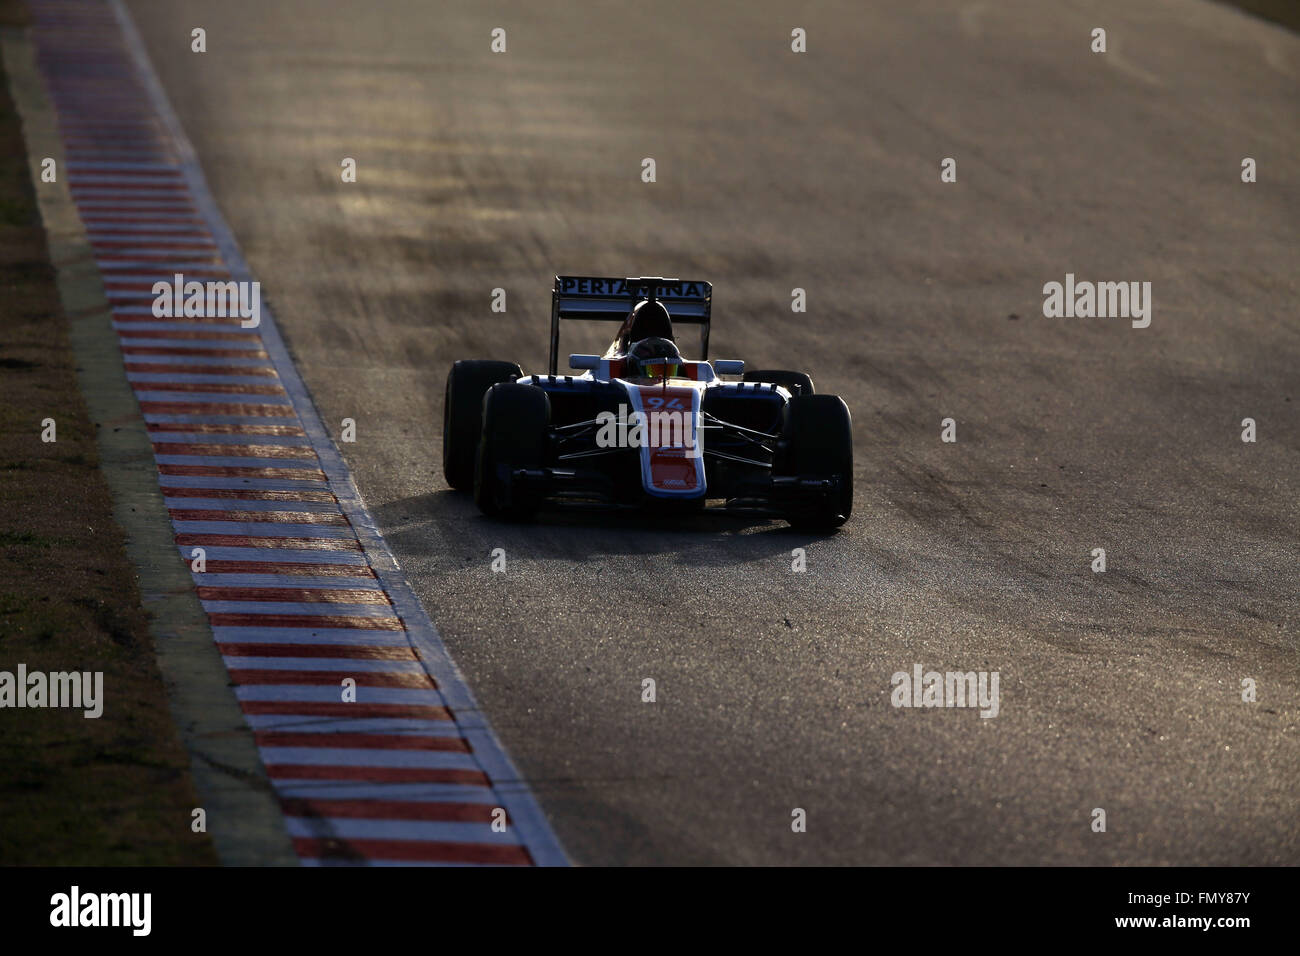 German Formula One driver Pascal Wehrlein of Manor Racing steers his car during the training session for the upcoming Formula One season at the Circuit de Barcelona - Catalunya in Barcelona, Spain, 23 February 2016. Photo: Jens Buettner/dpa Stock Photo